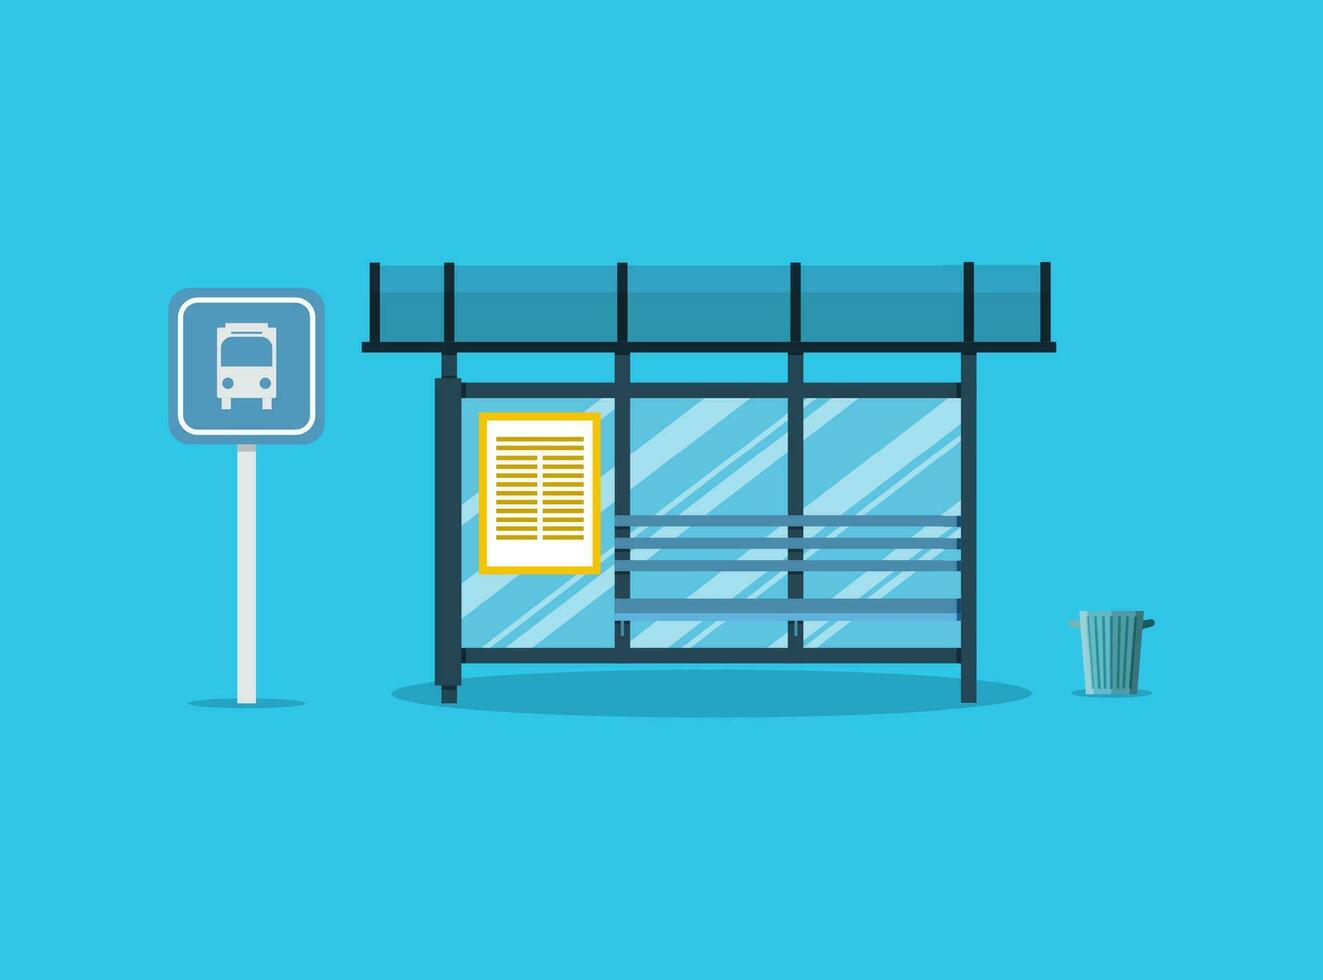 Empty Bus Stop with bench and trash vector